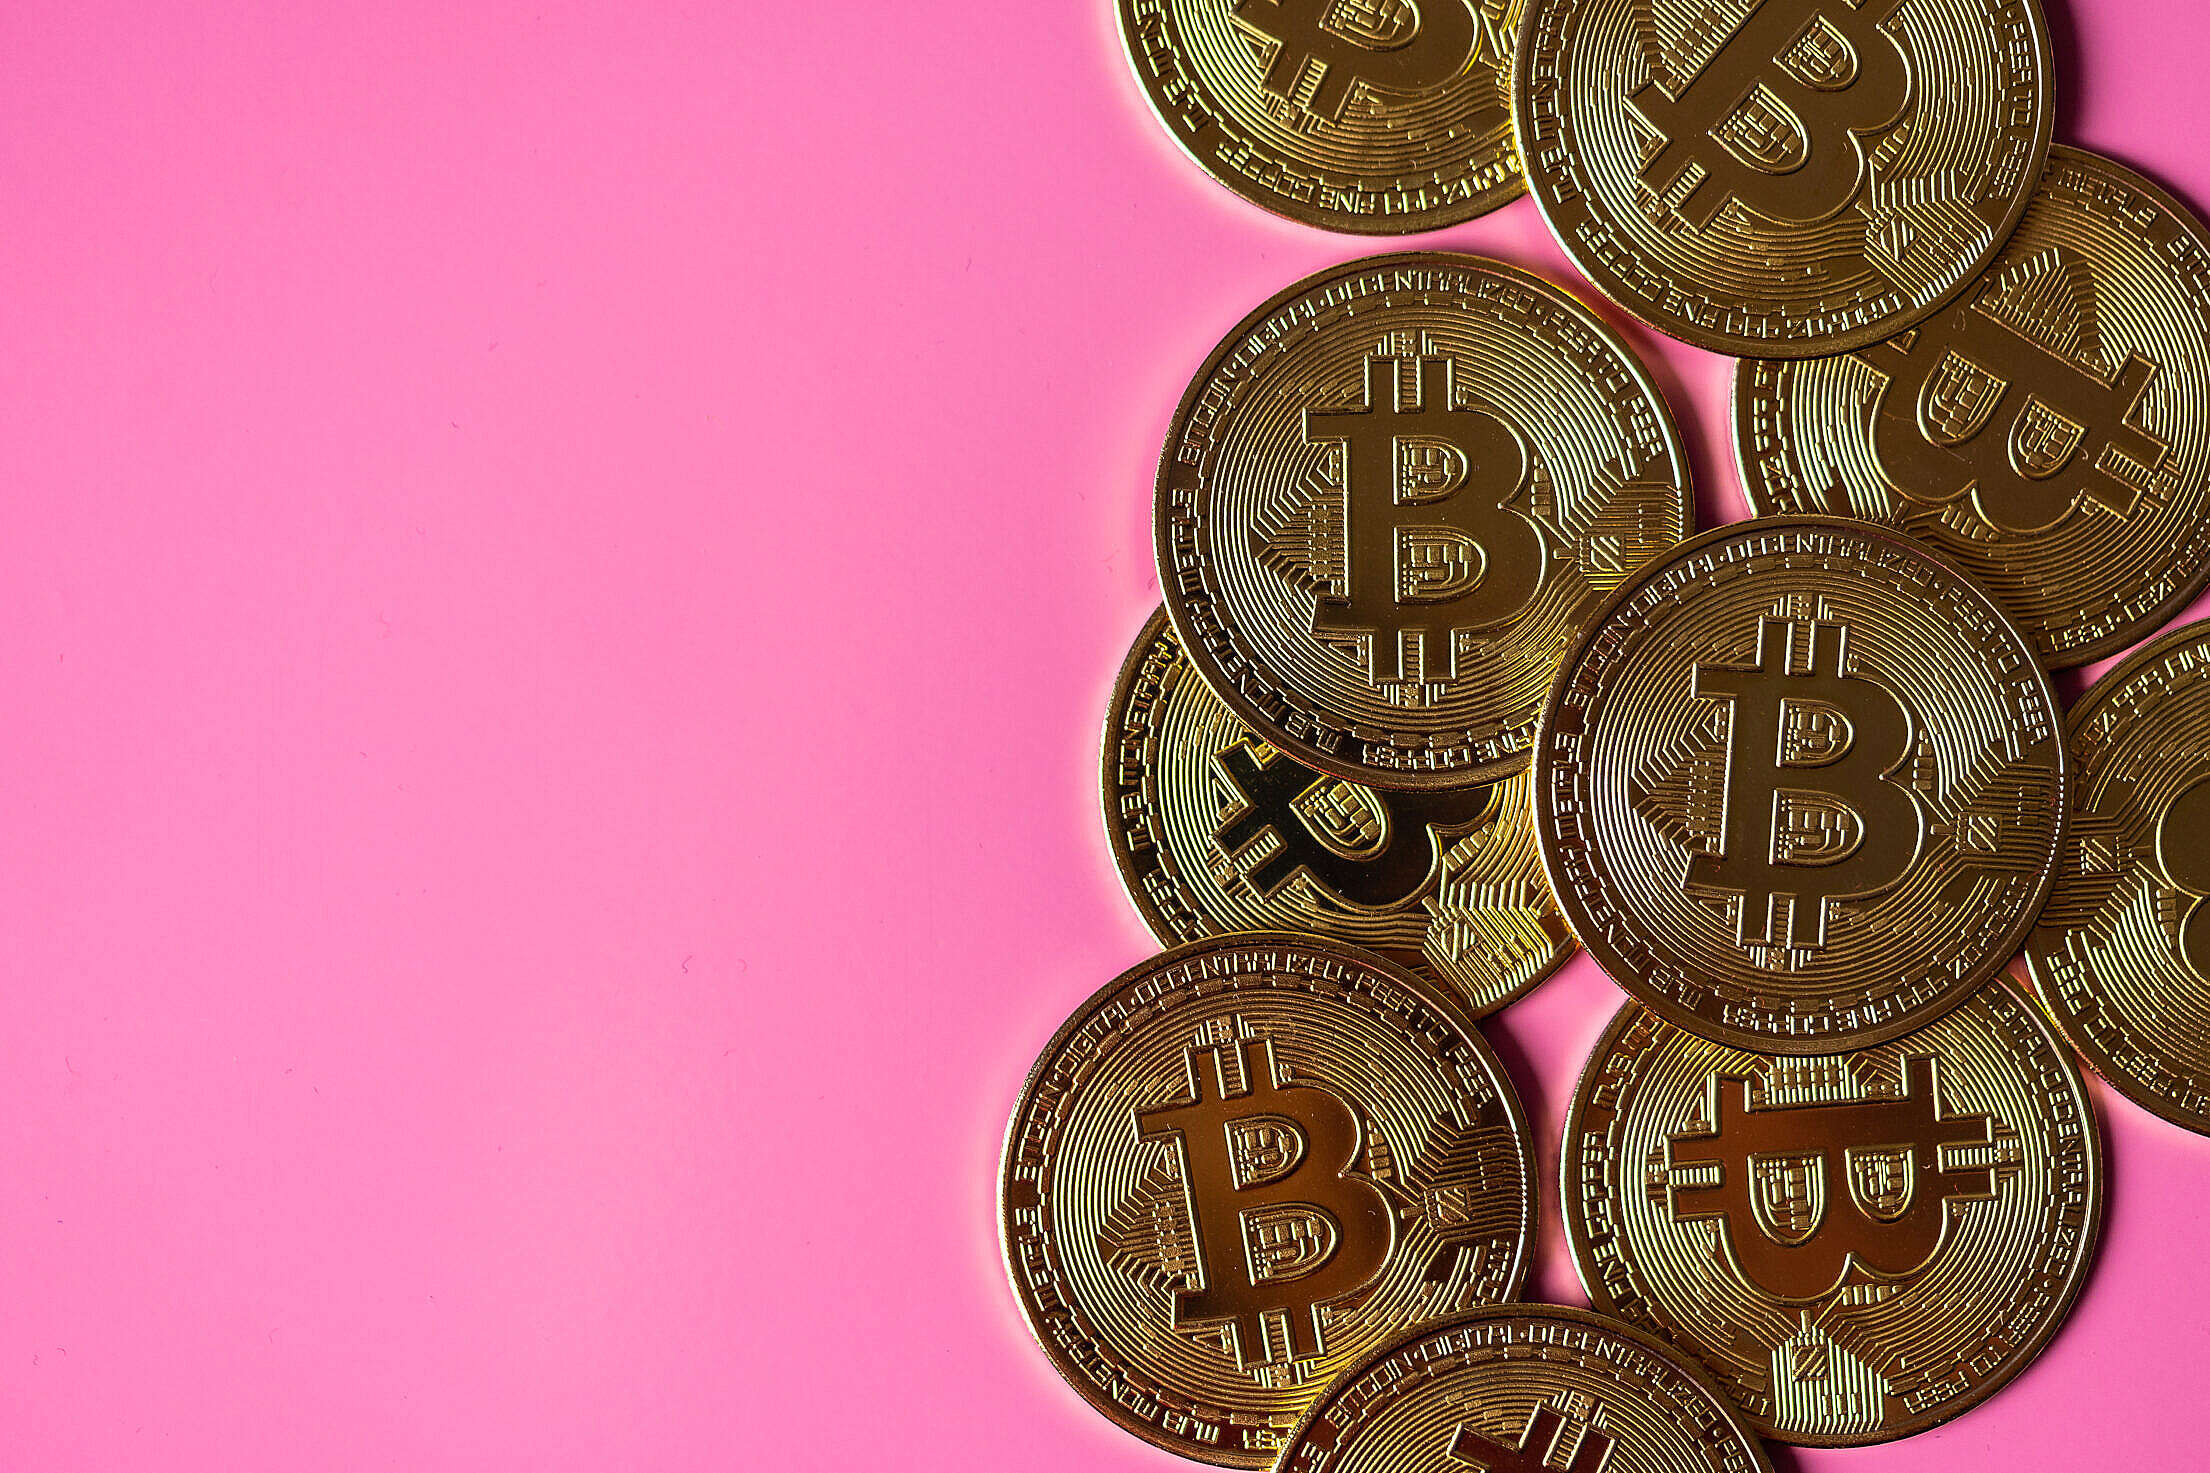 Bitcoin Coins on Pink Background Free Stock Photo